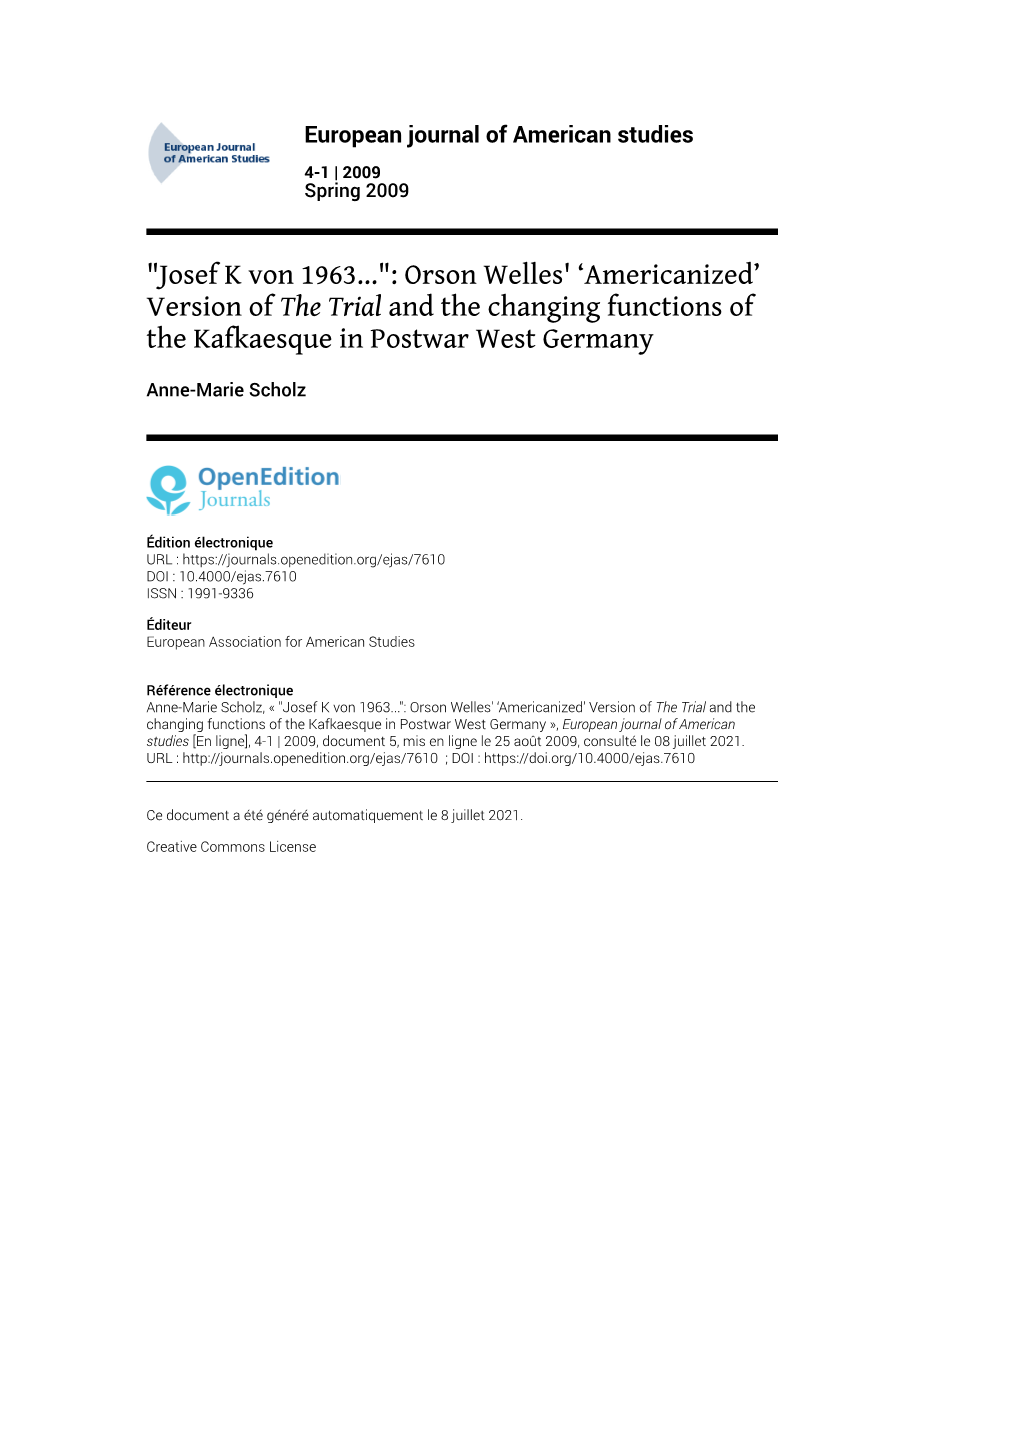 European Journal of American Studies, 4-1 | 2009 "Josef K Von 1963...": Orson Welles' ‘Americanized’ Version of the Trial and